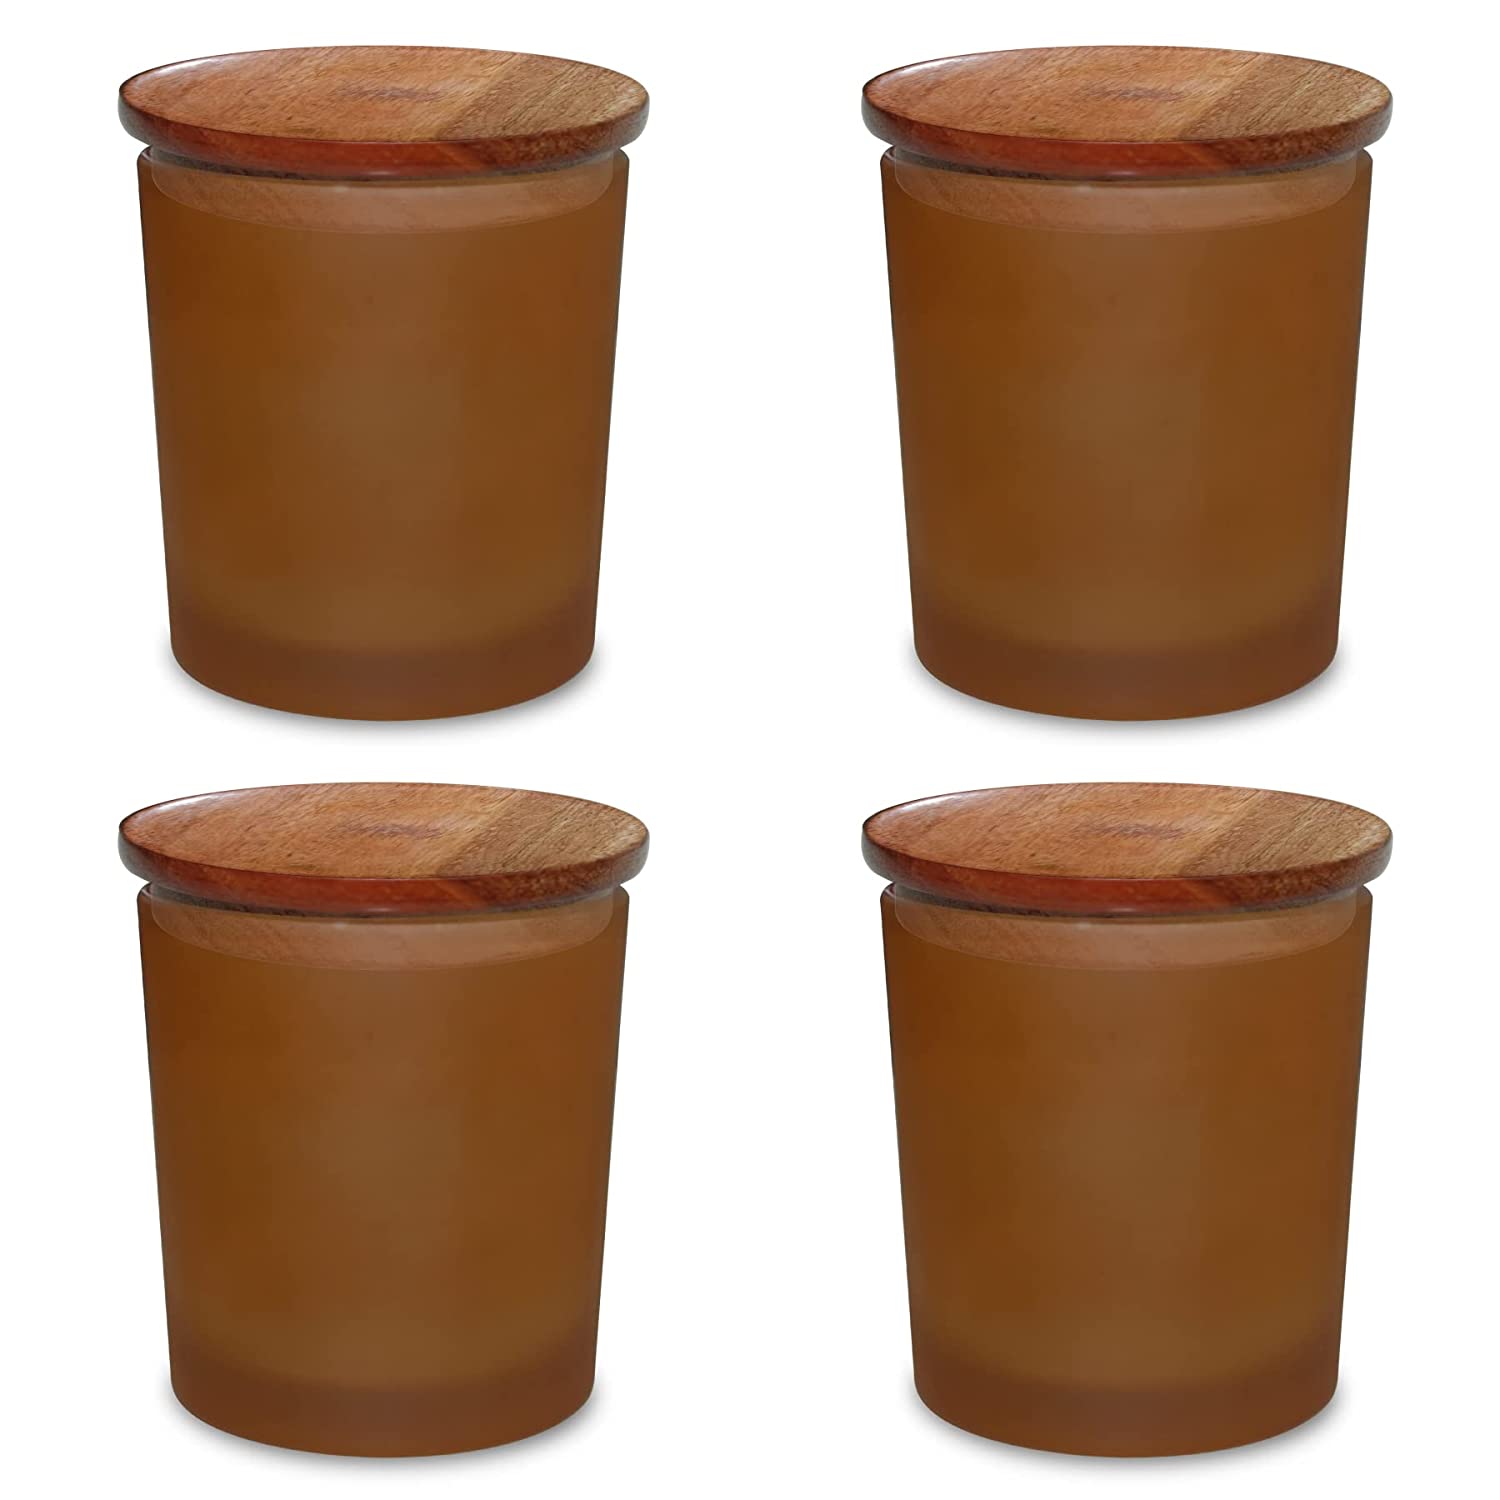 Shoprythm Packaging,Cosmetic Jar Amber Frosted Glass Jar with Wooden Lid